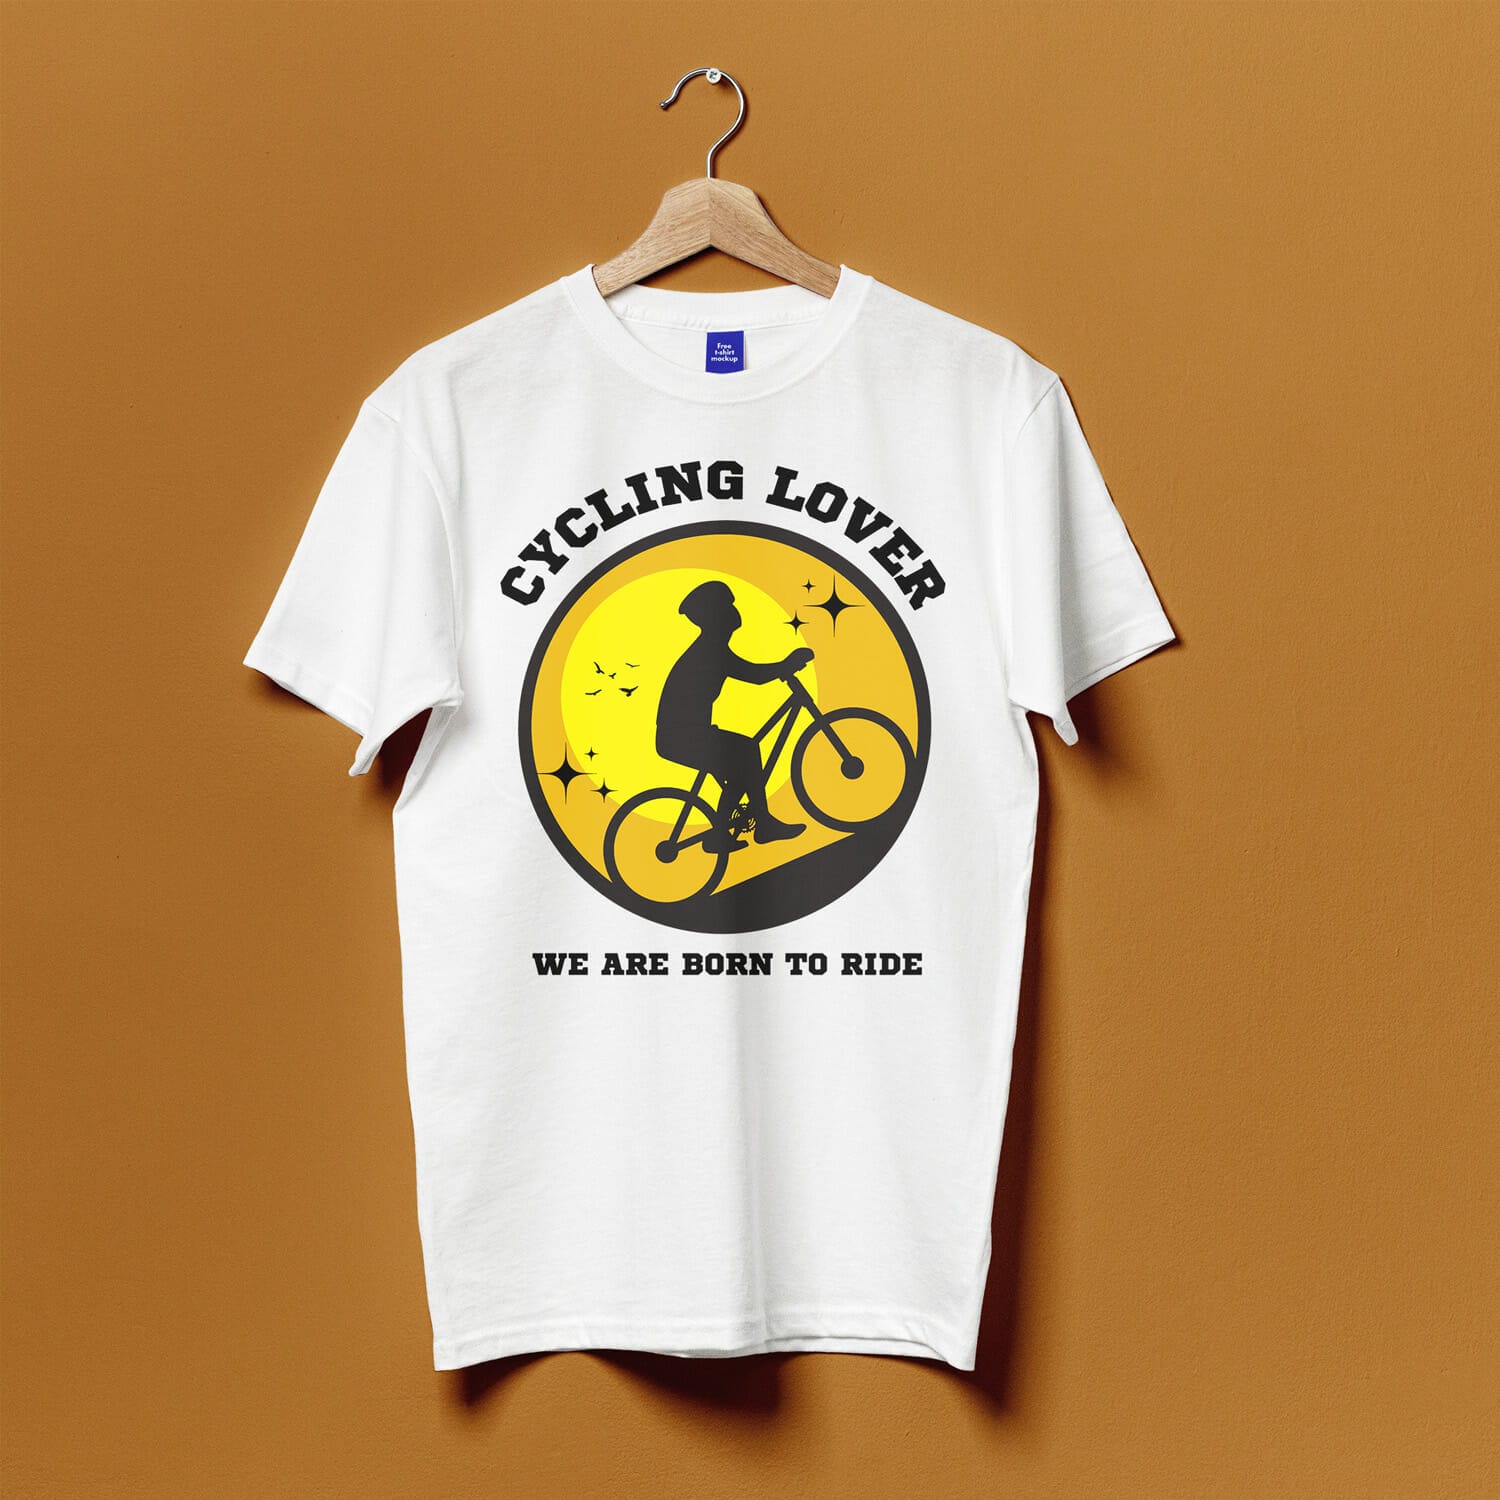 Cycling lover we are born to ride T-shirt design